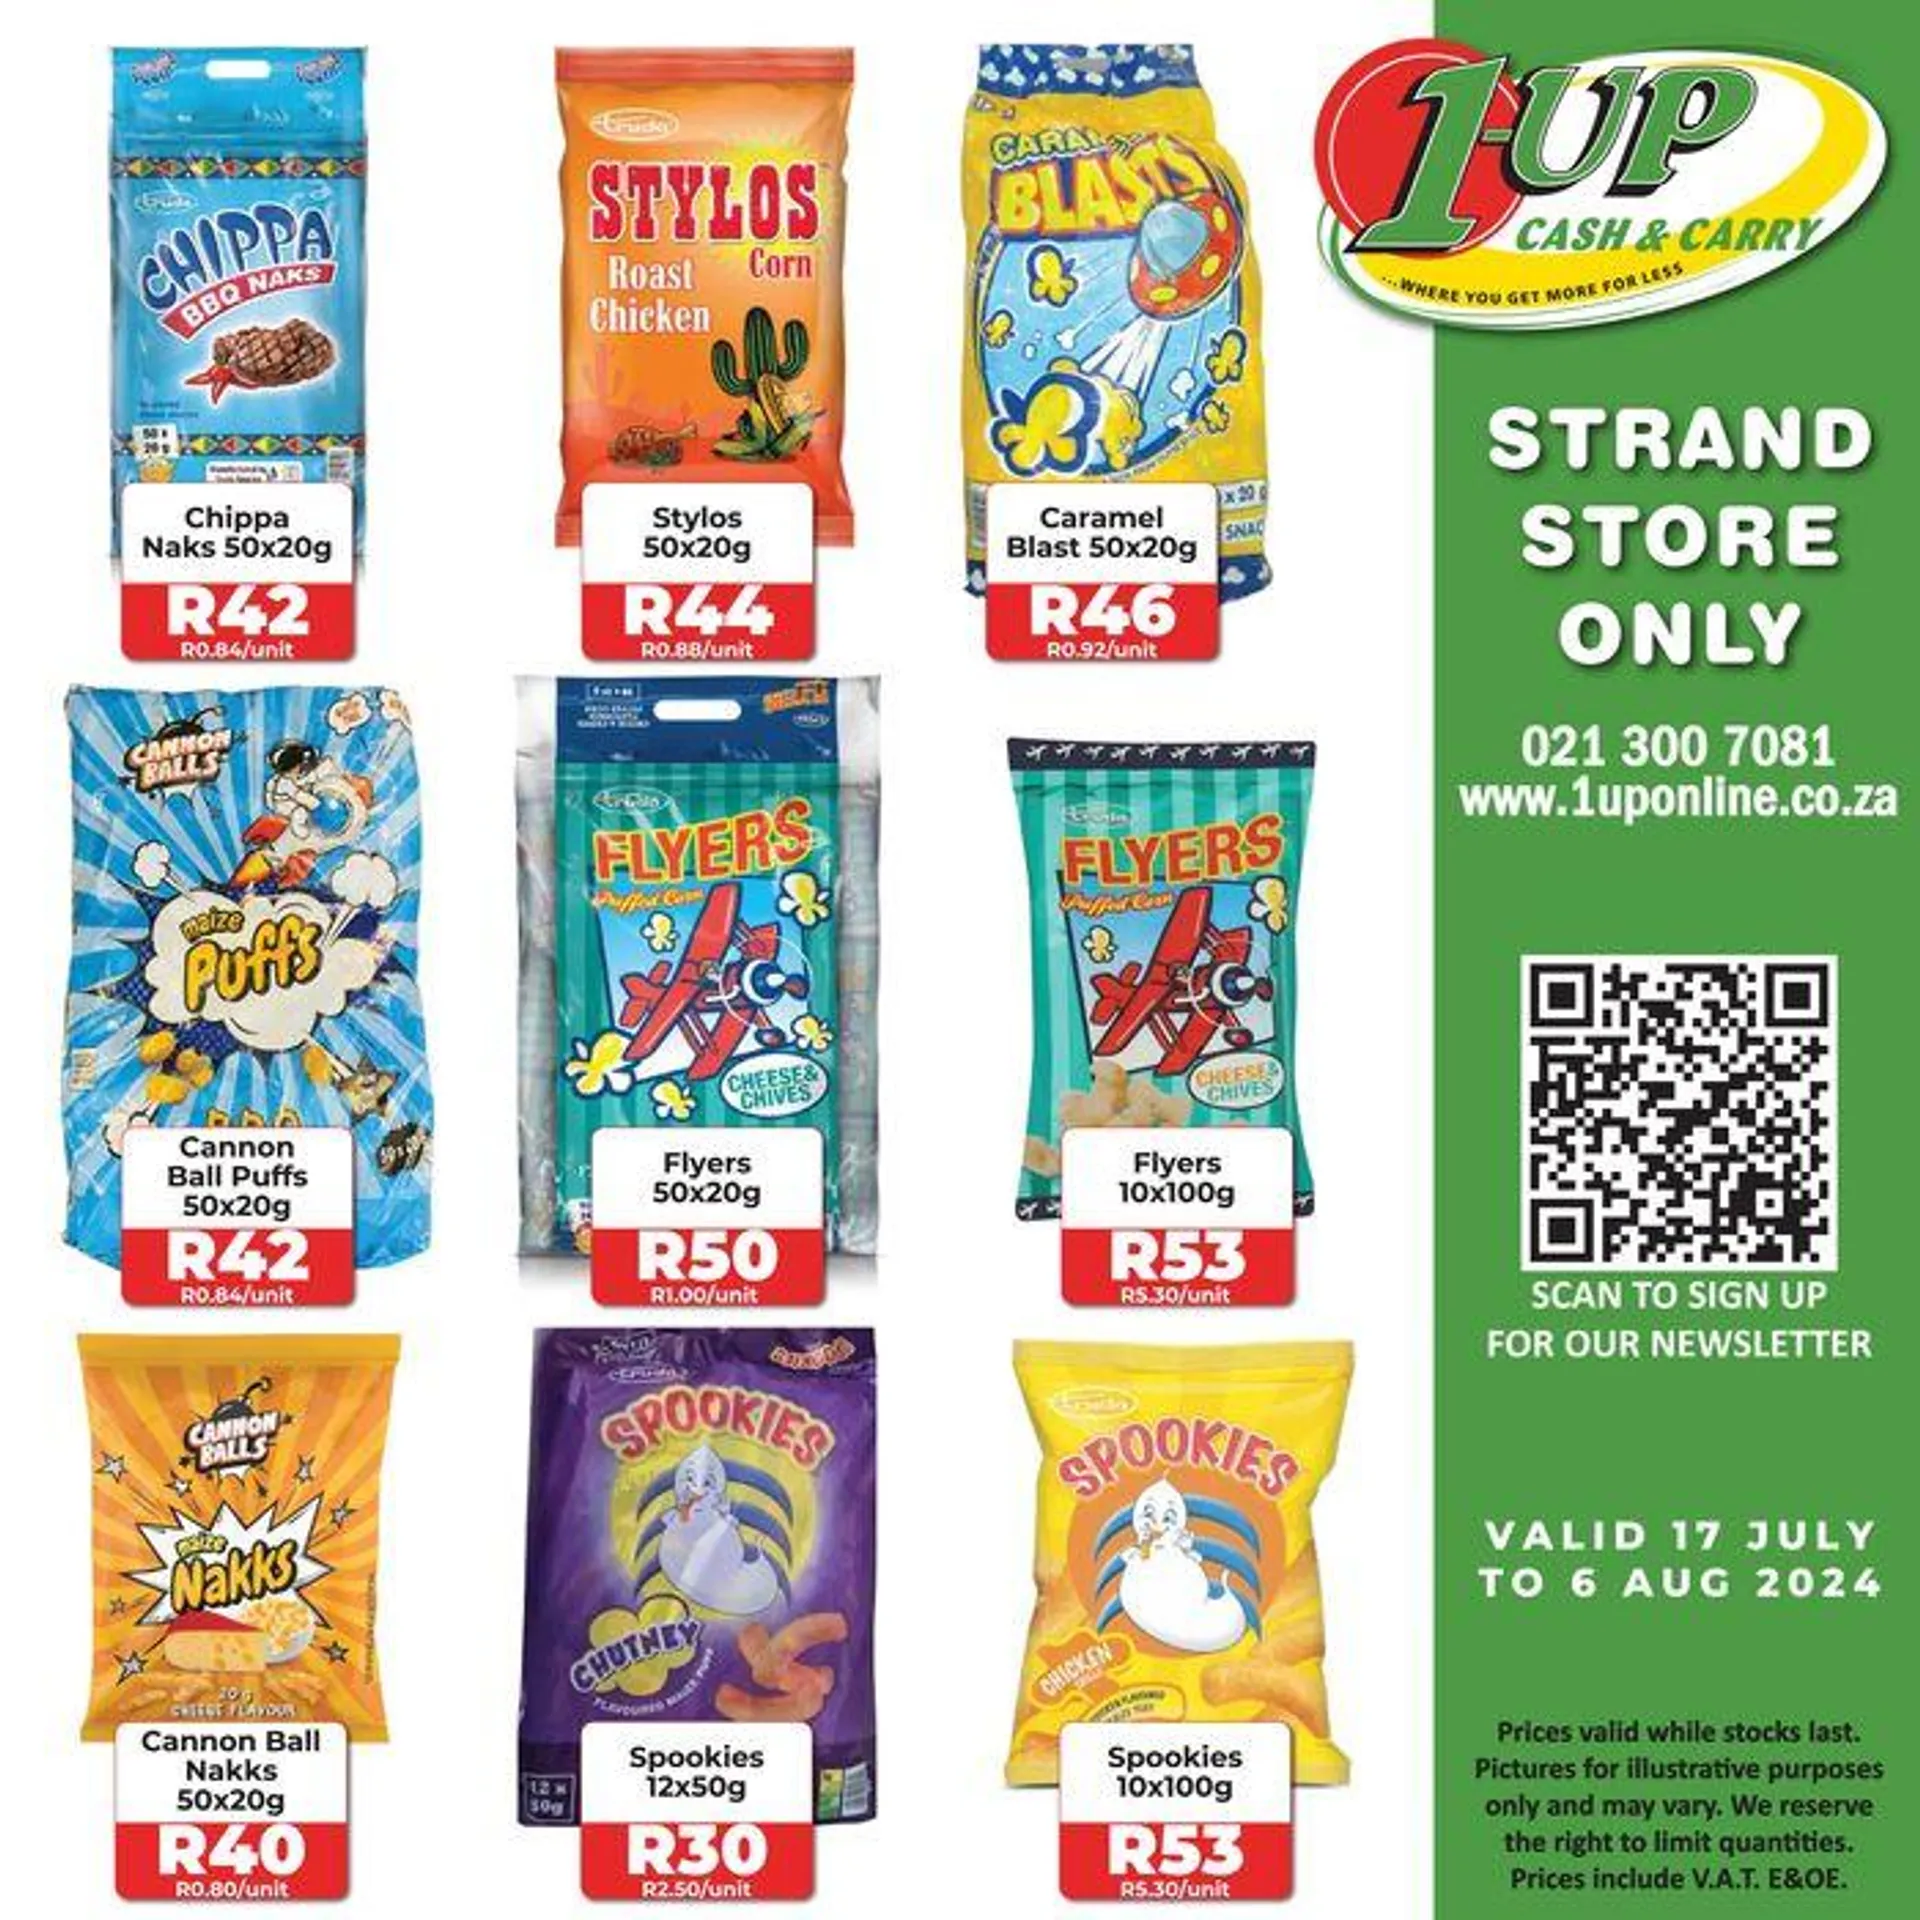 1UP weekly specials - 1